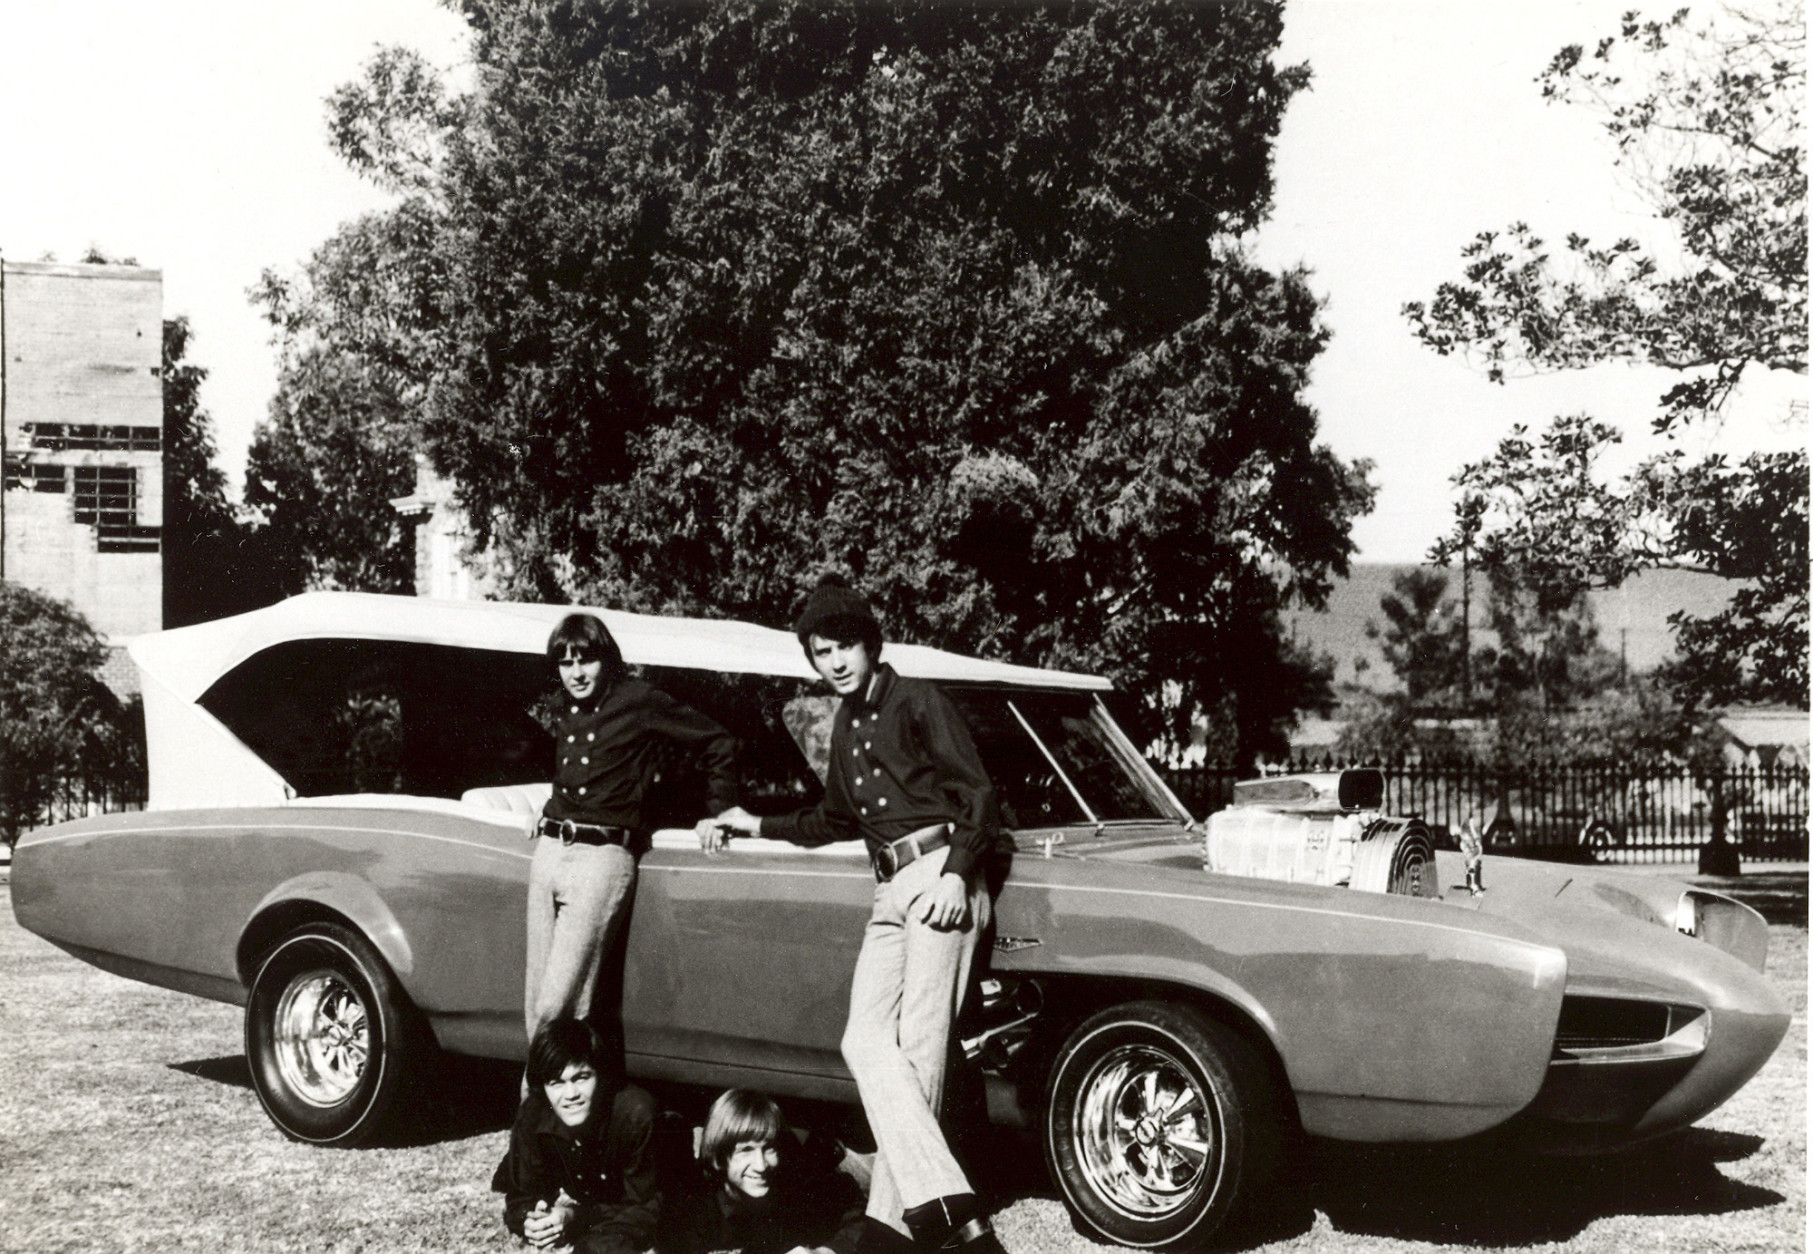 FILE - In this 1966 file photo, cast members of the television show "The Monkees," from top left, Davy Jones, Michael Nesmith, from lower left, Micky Dolenz, and Peter Tork pose next to their customized Pontiac GTO. Jones died Wednesday Feb. 29, 2012 in Florida. He was 66. Jones rose to fame in 1965 when he joined The Monkees, a British popular rock group formed for a television show. Jones sang lead vocals on songs like "I Wanna Be Free" and "Daydream Believer."    (AP Photo/File)